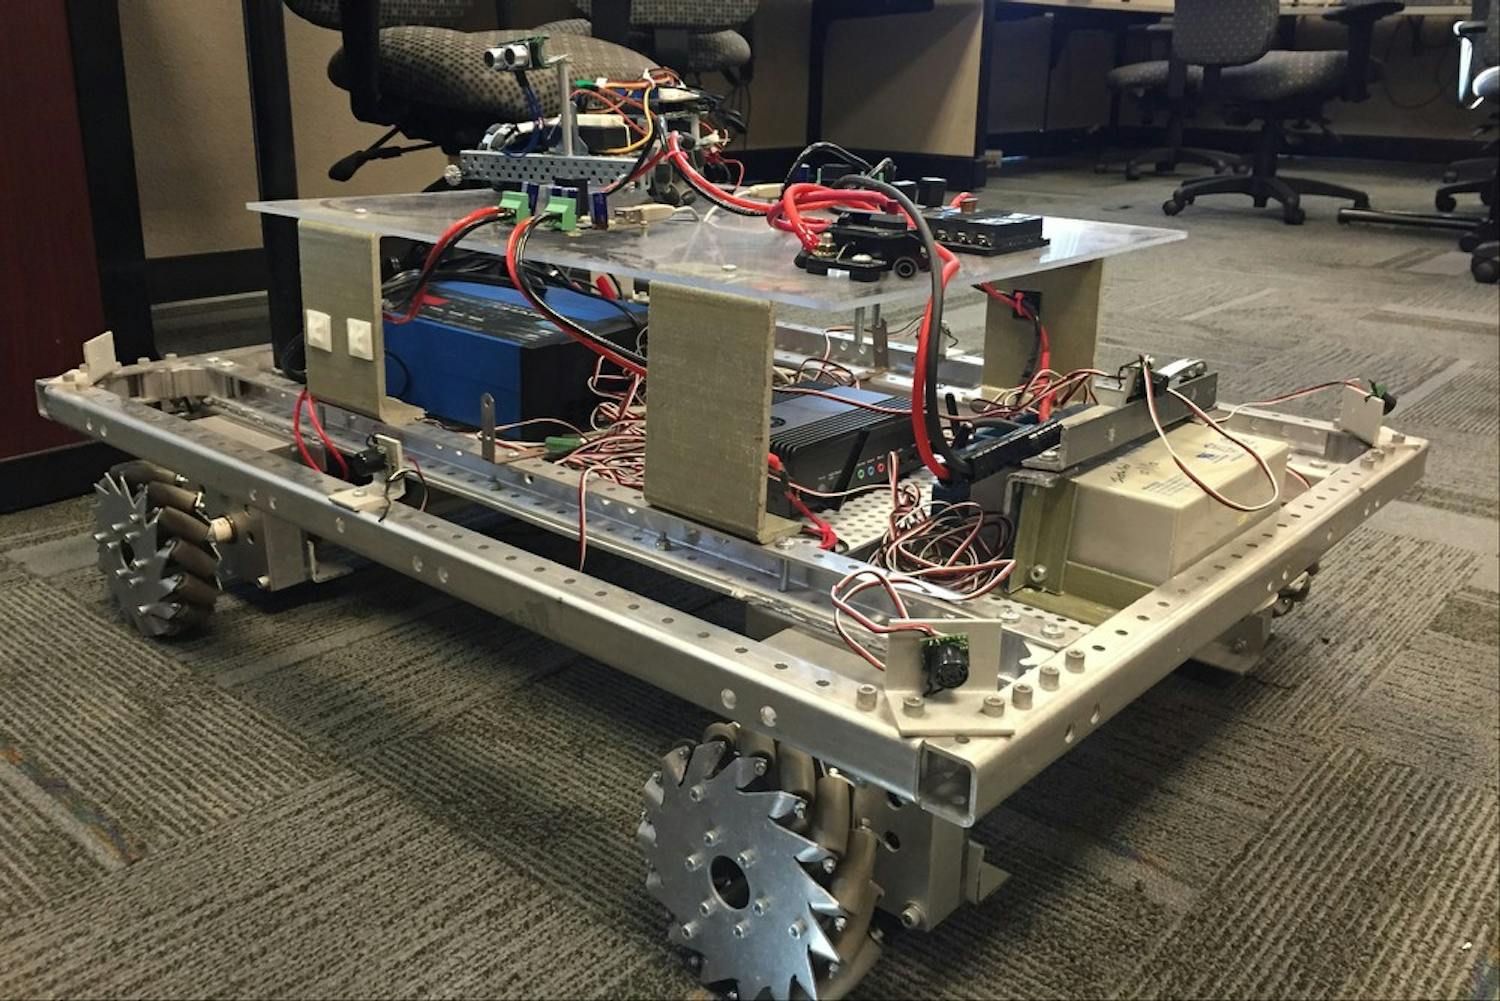 The Sun Devil Robotics Club works on about five hands-on robotics projects at a time and enters competitions both nationally and internationally with their completed robots like the one seen above.